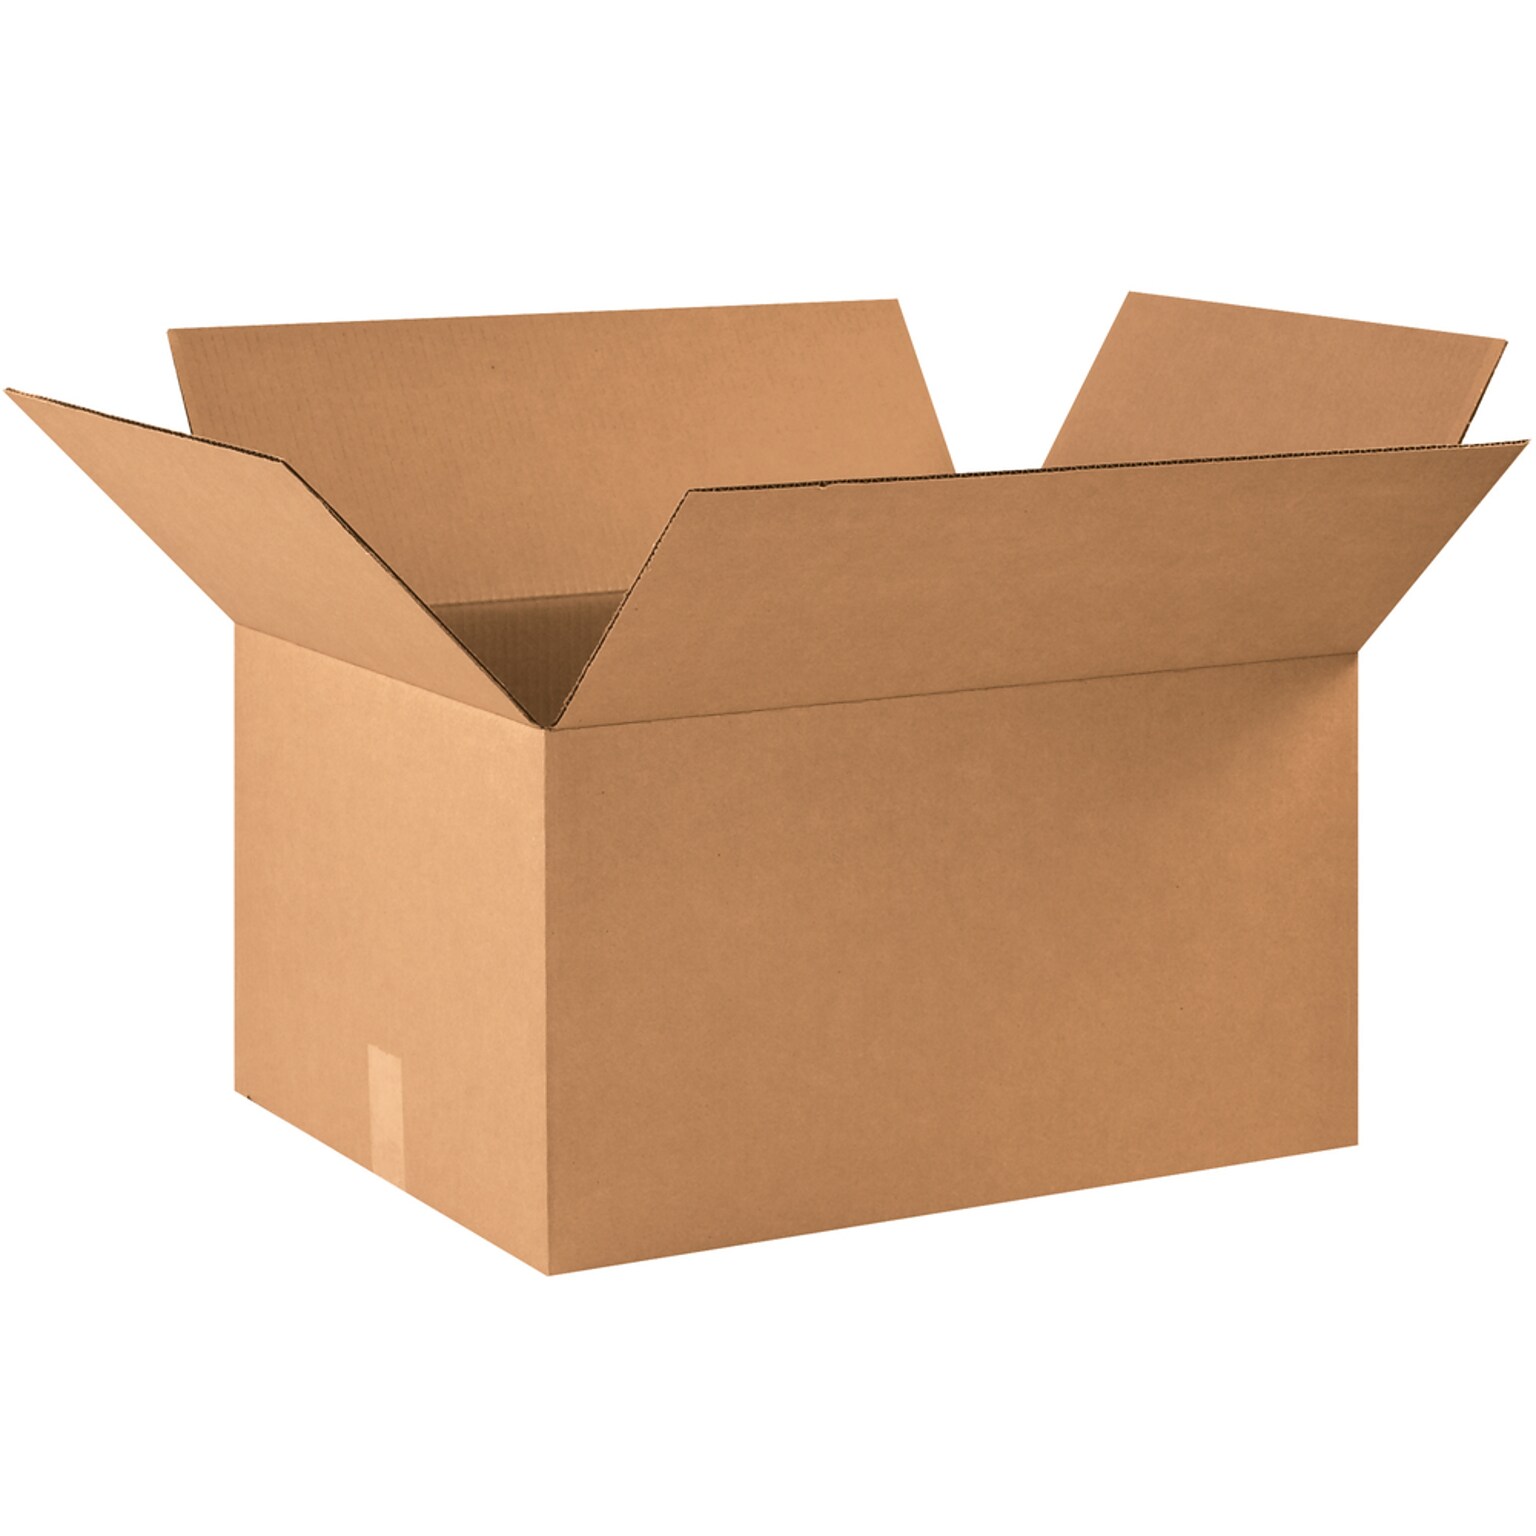 SI Products 22 x 17 x 12 Corrugated Shipping Boxes, 200#/ECT-32 Mullen Rated Corrugated, Pack of 10, (221712)